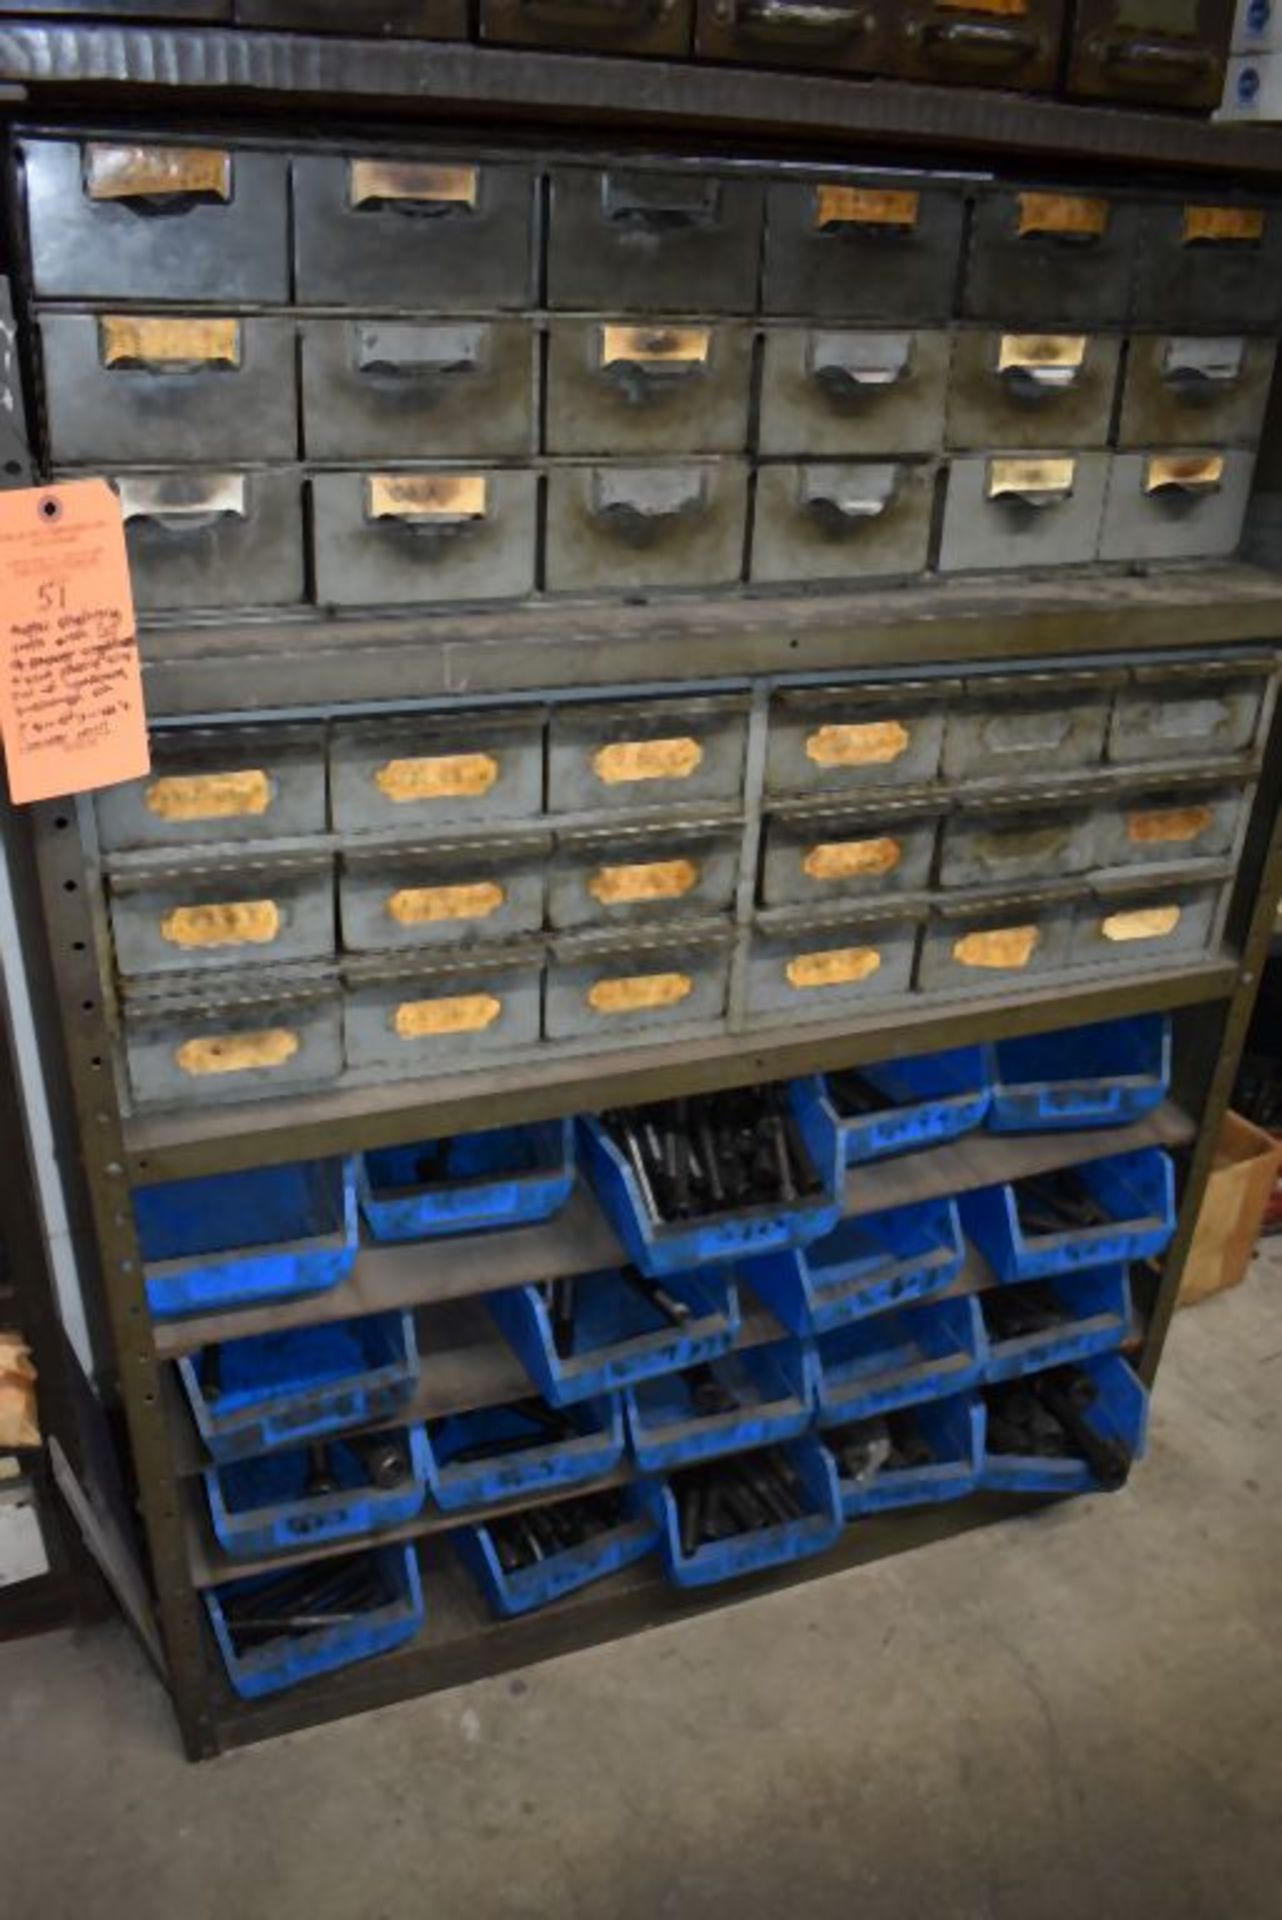 METAL SHELVING UNIT WITH (2) 18 DRAWER ORGANIZERS AND BLUE PLASTIC BINS FULL OF HARDWARE,